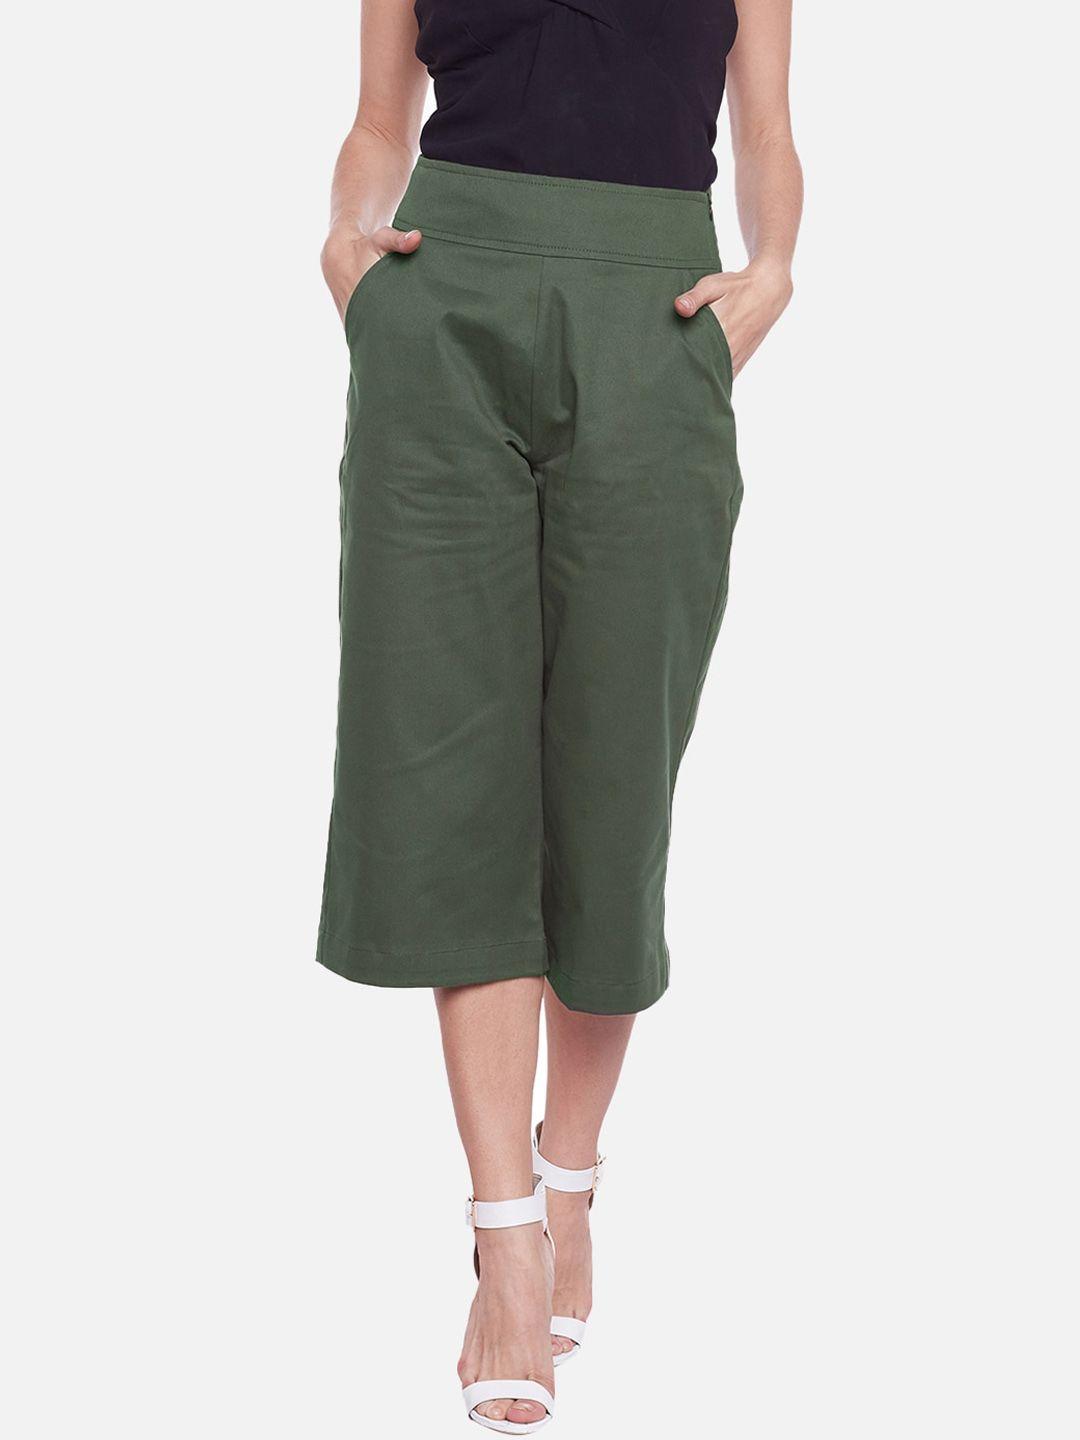 castle lifestyle women olive green solid smart easy wash culottes trousers